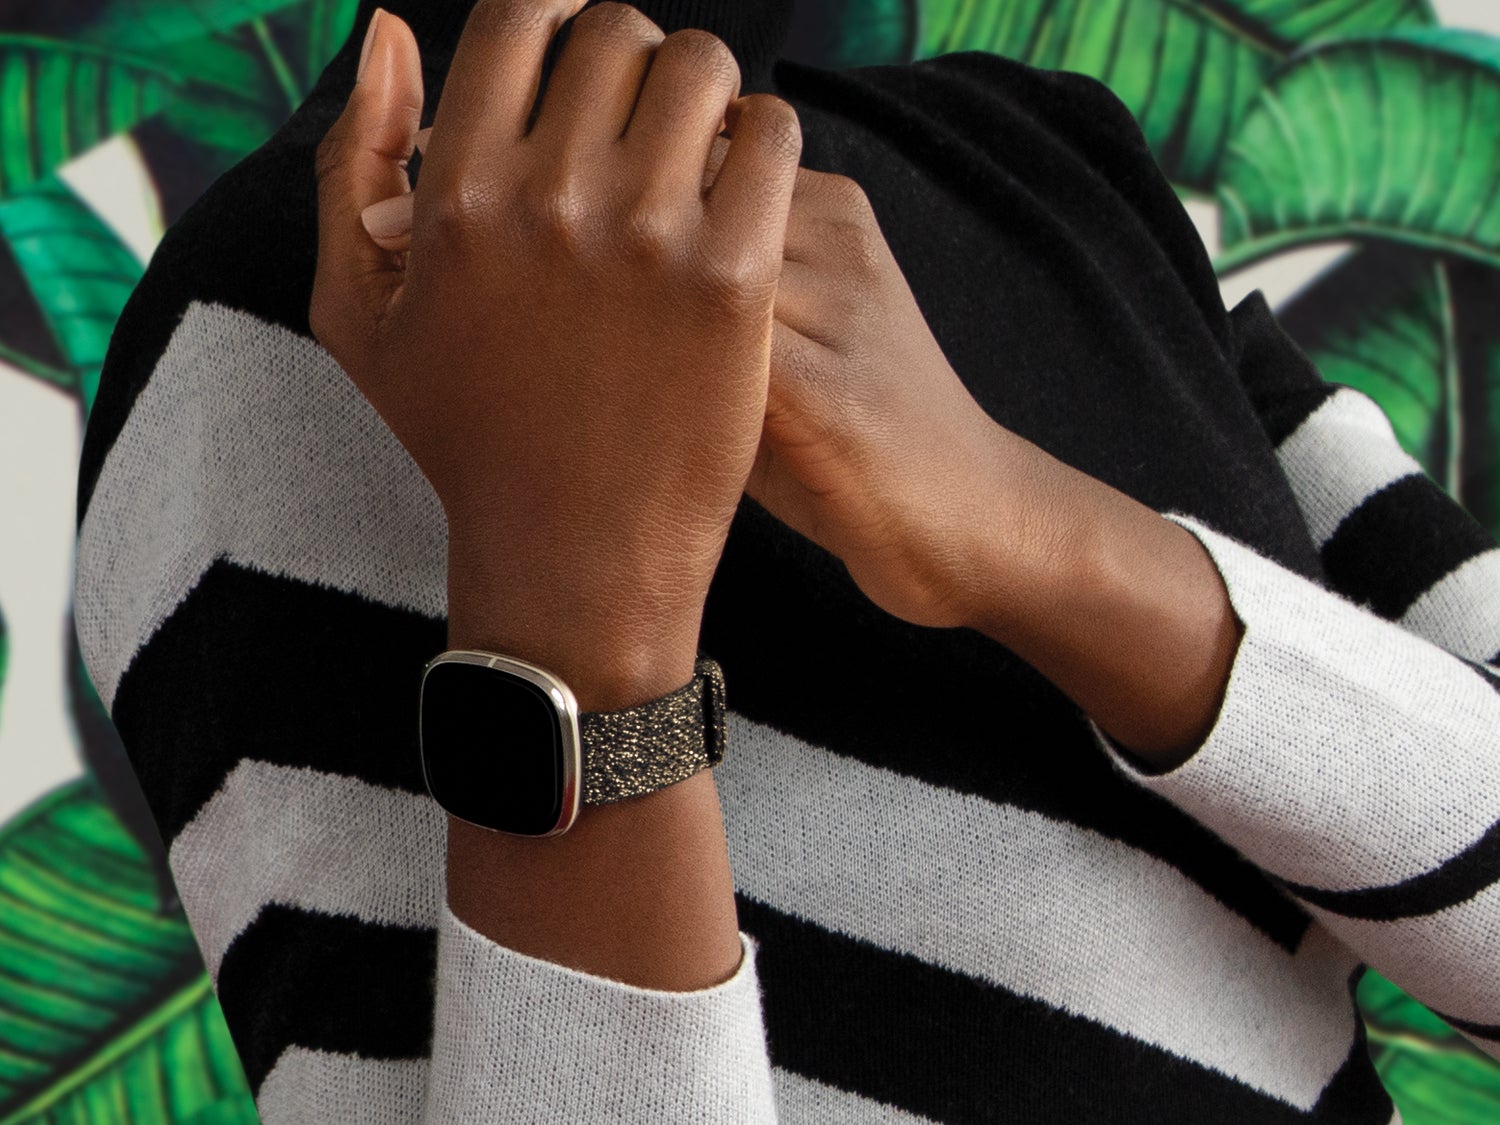 Shop Now: Victor Glemaud Launches Knit Bands with Fitbit